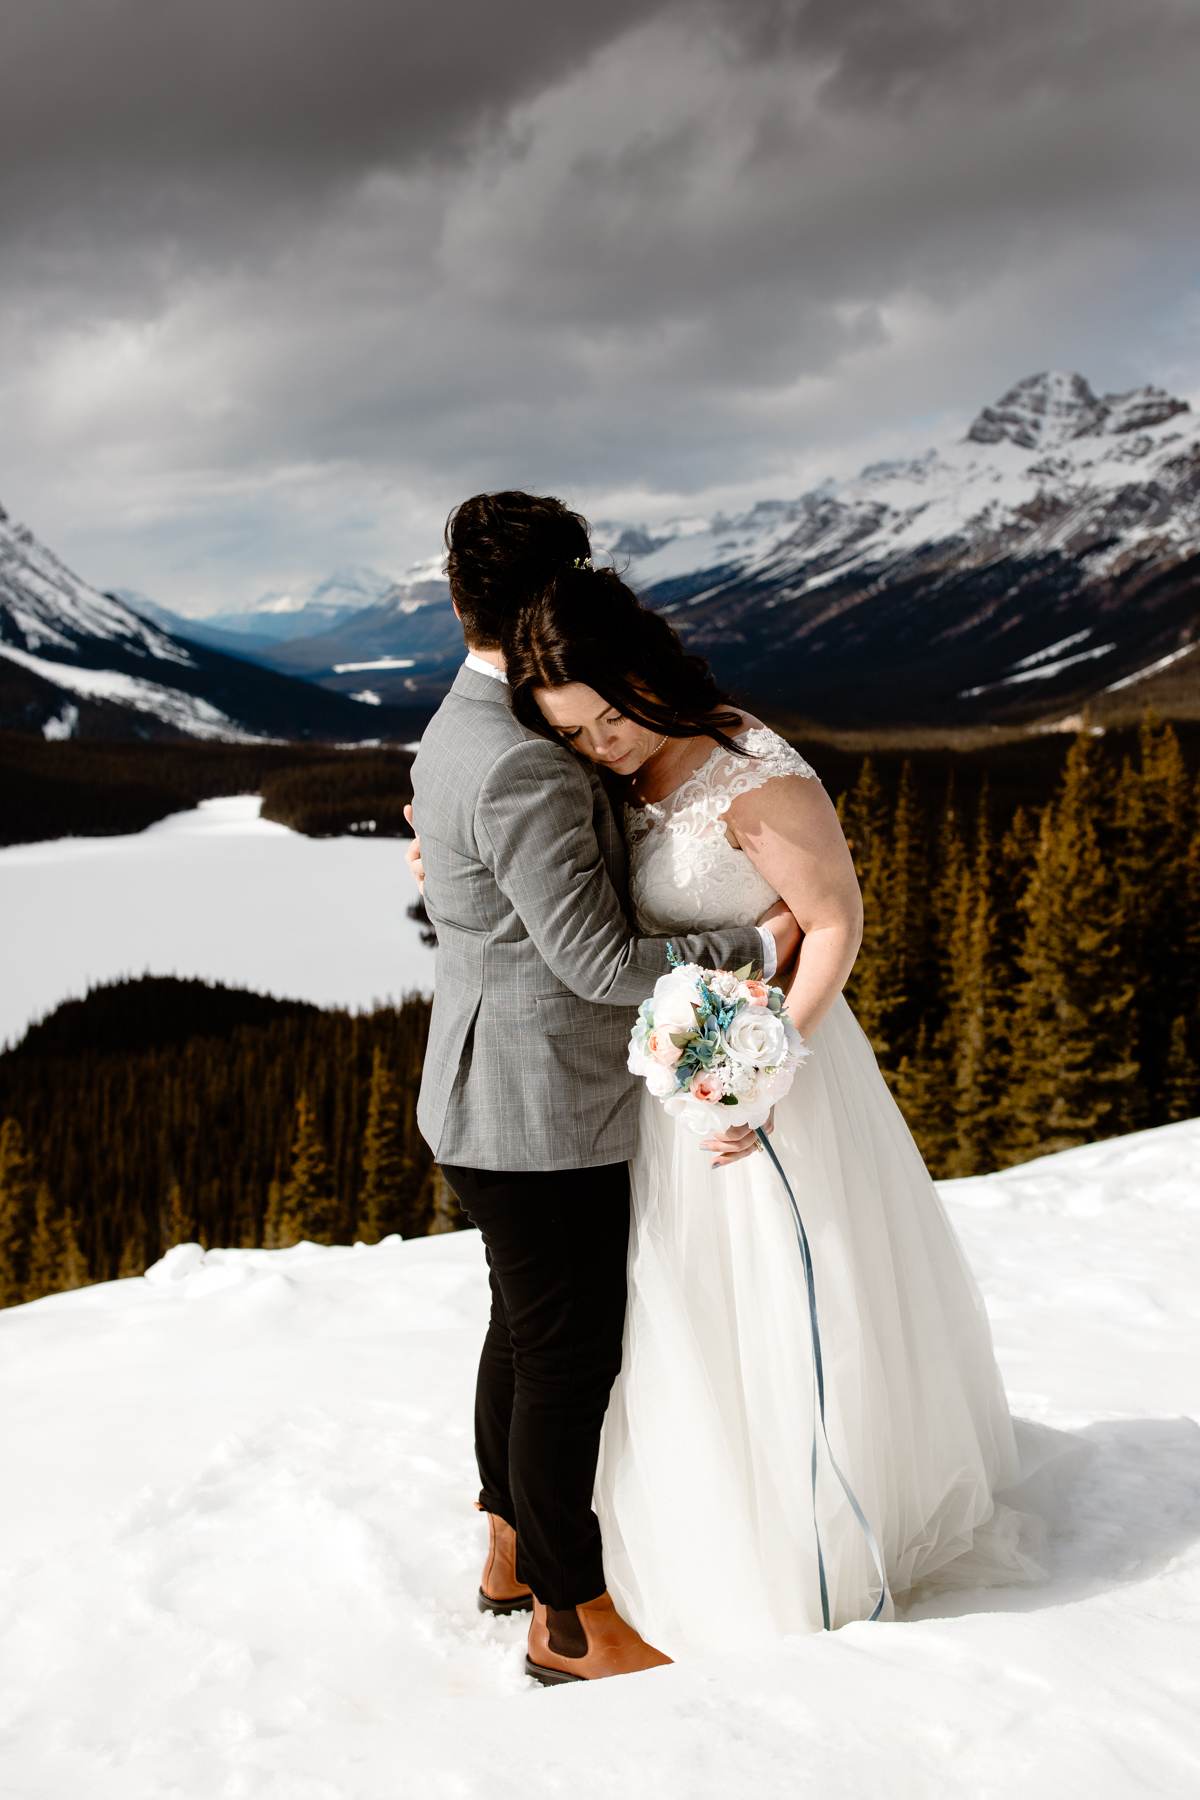 Banff National Park Elopement Photography with LGBTQ-friendly photographers - Image 9